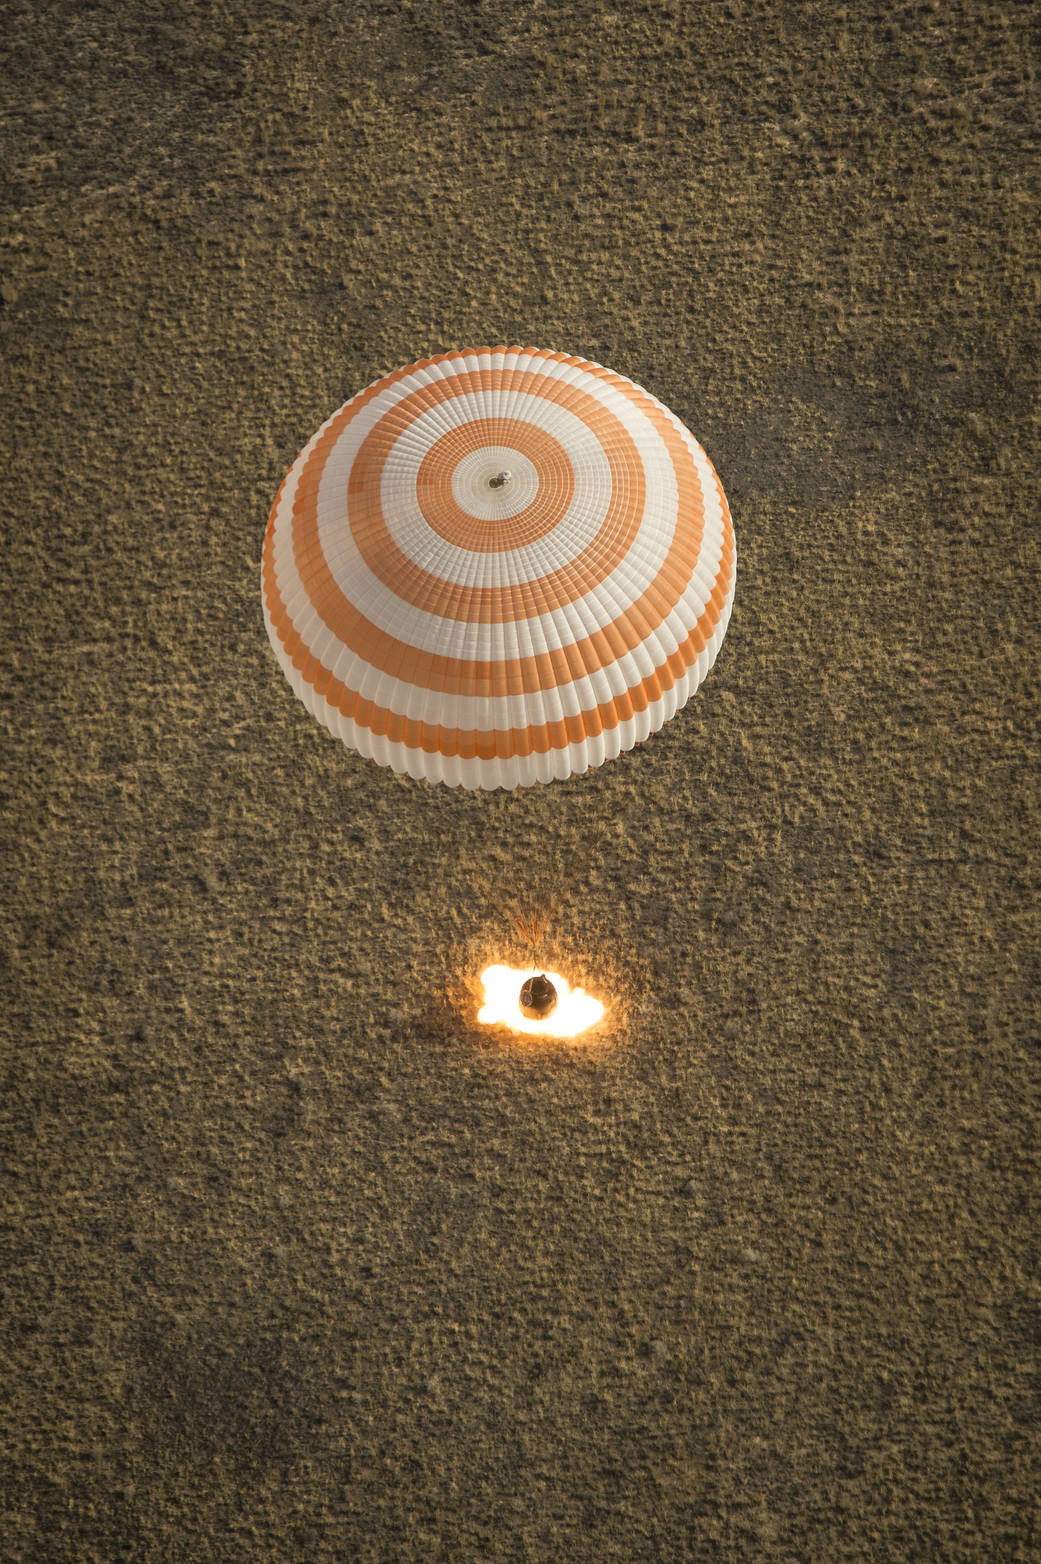 The Soyuz TMA-08M spacecraft with Expedition 36 Commander Pavel Vinogradov of the Russian Federal Space Agency (Roscosmos), Flig